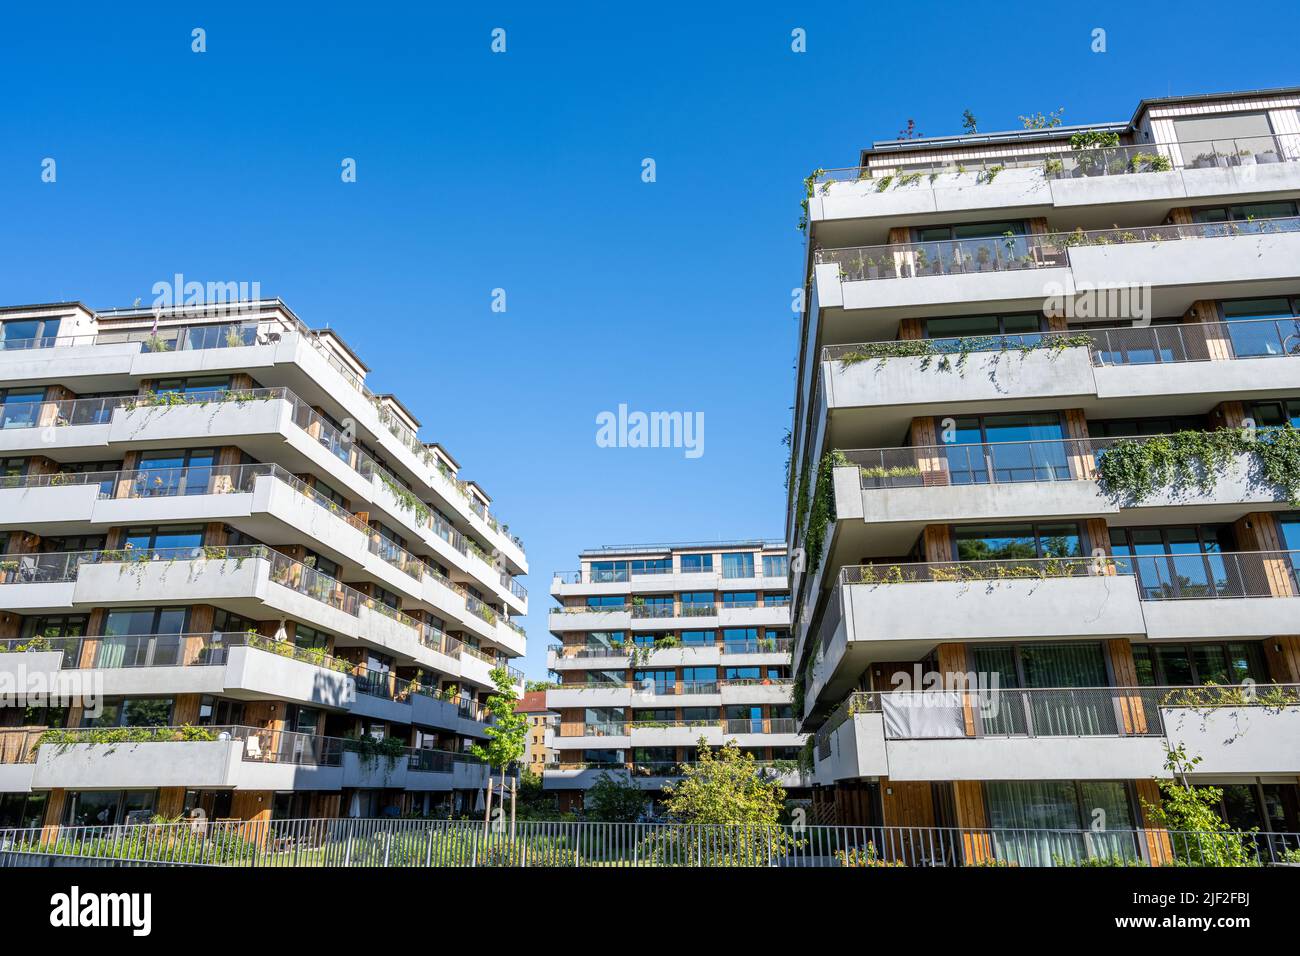 Modern apartment buildings with a concrete facade seen in Berlin, Germany Stock Photo